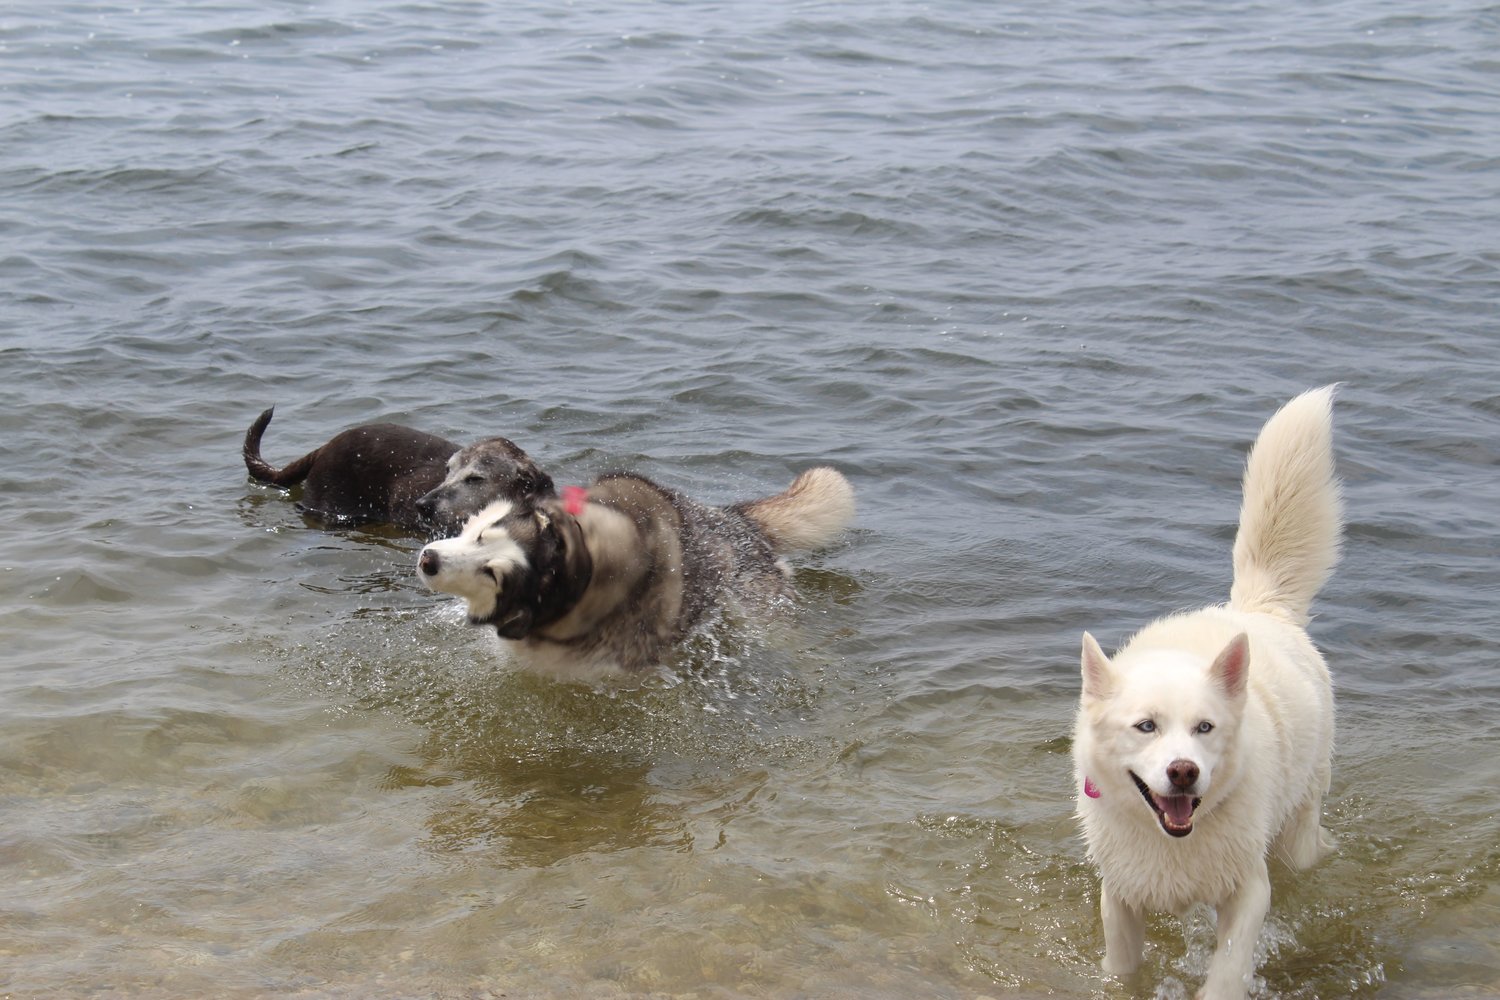 Nearly 50 dogs came to LI-DOG’s annual Beach Party at Mud Creek on Saturday, July 16.